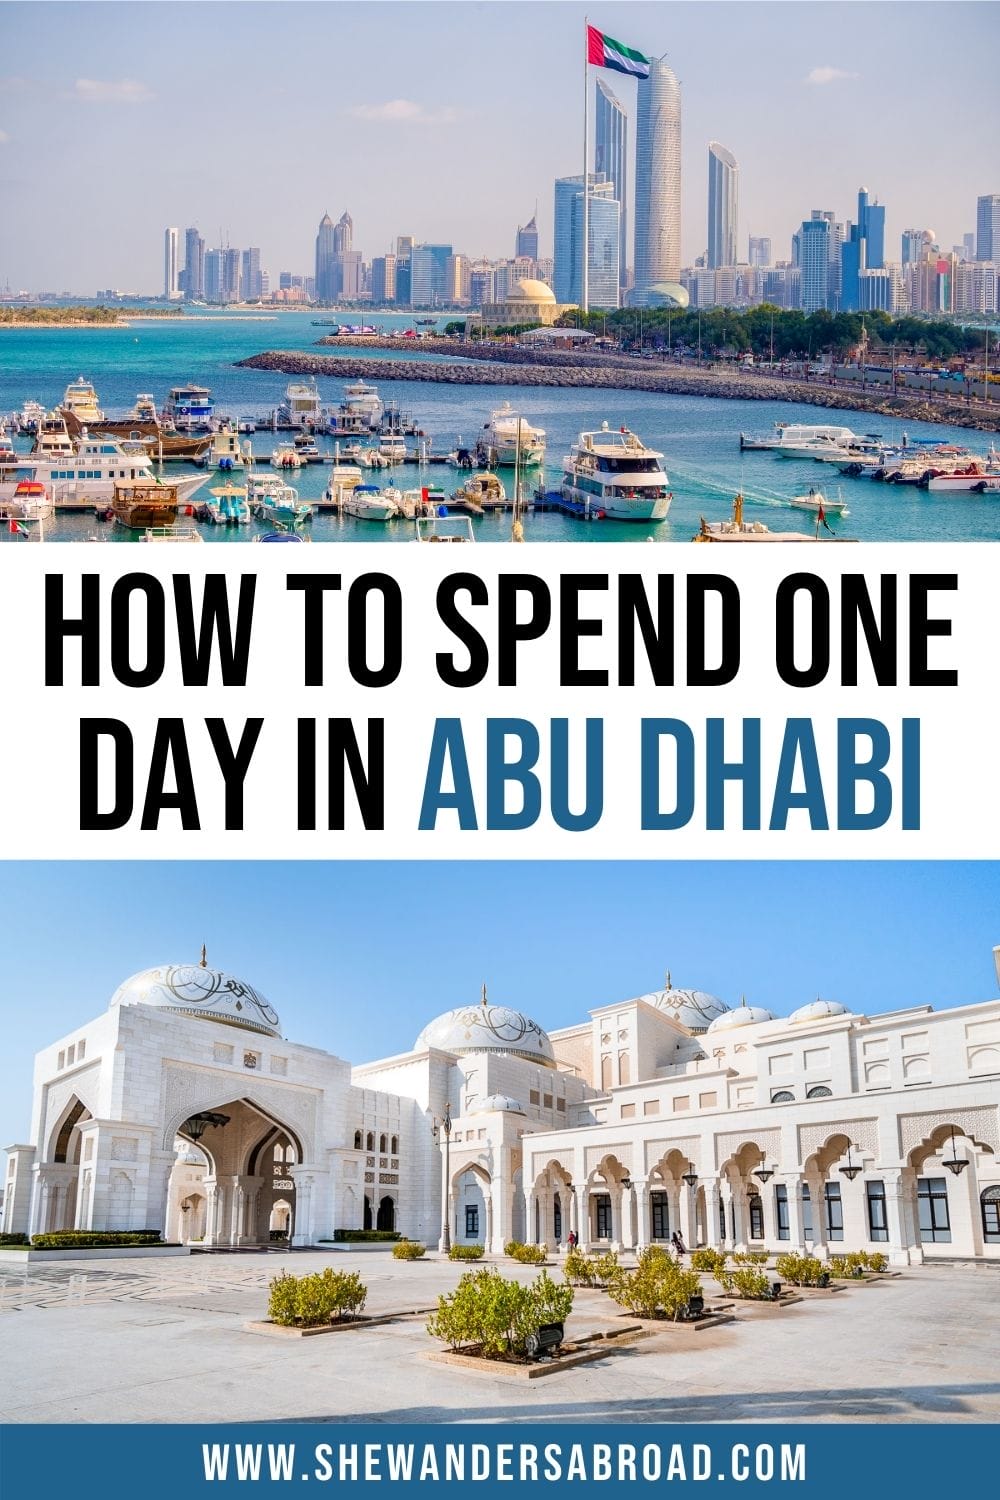 How to See the Best of Abu Dhabi in One Day